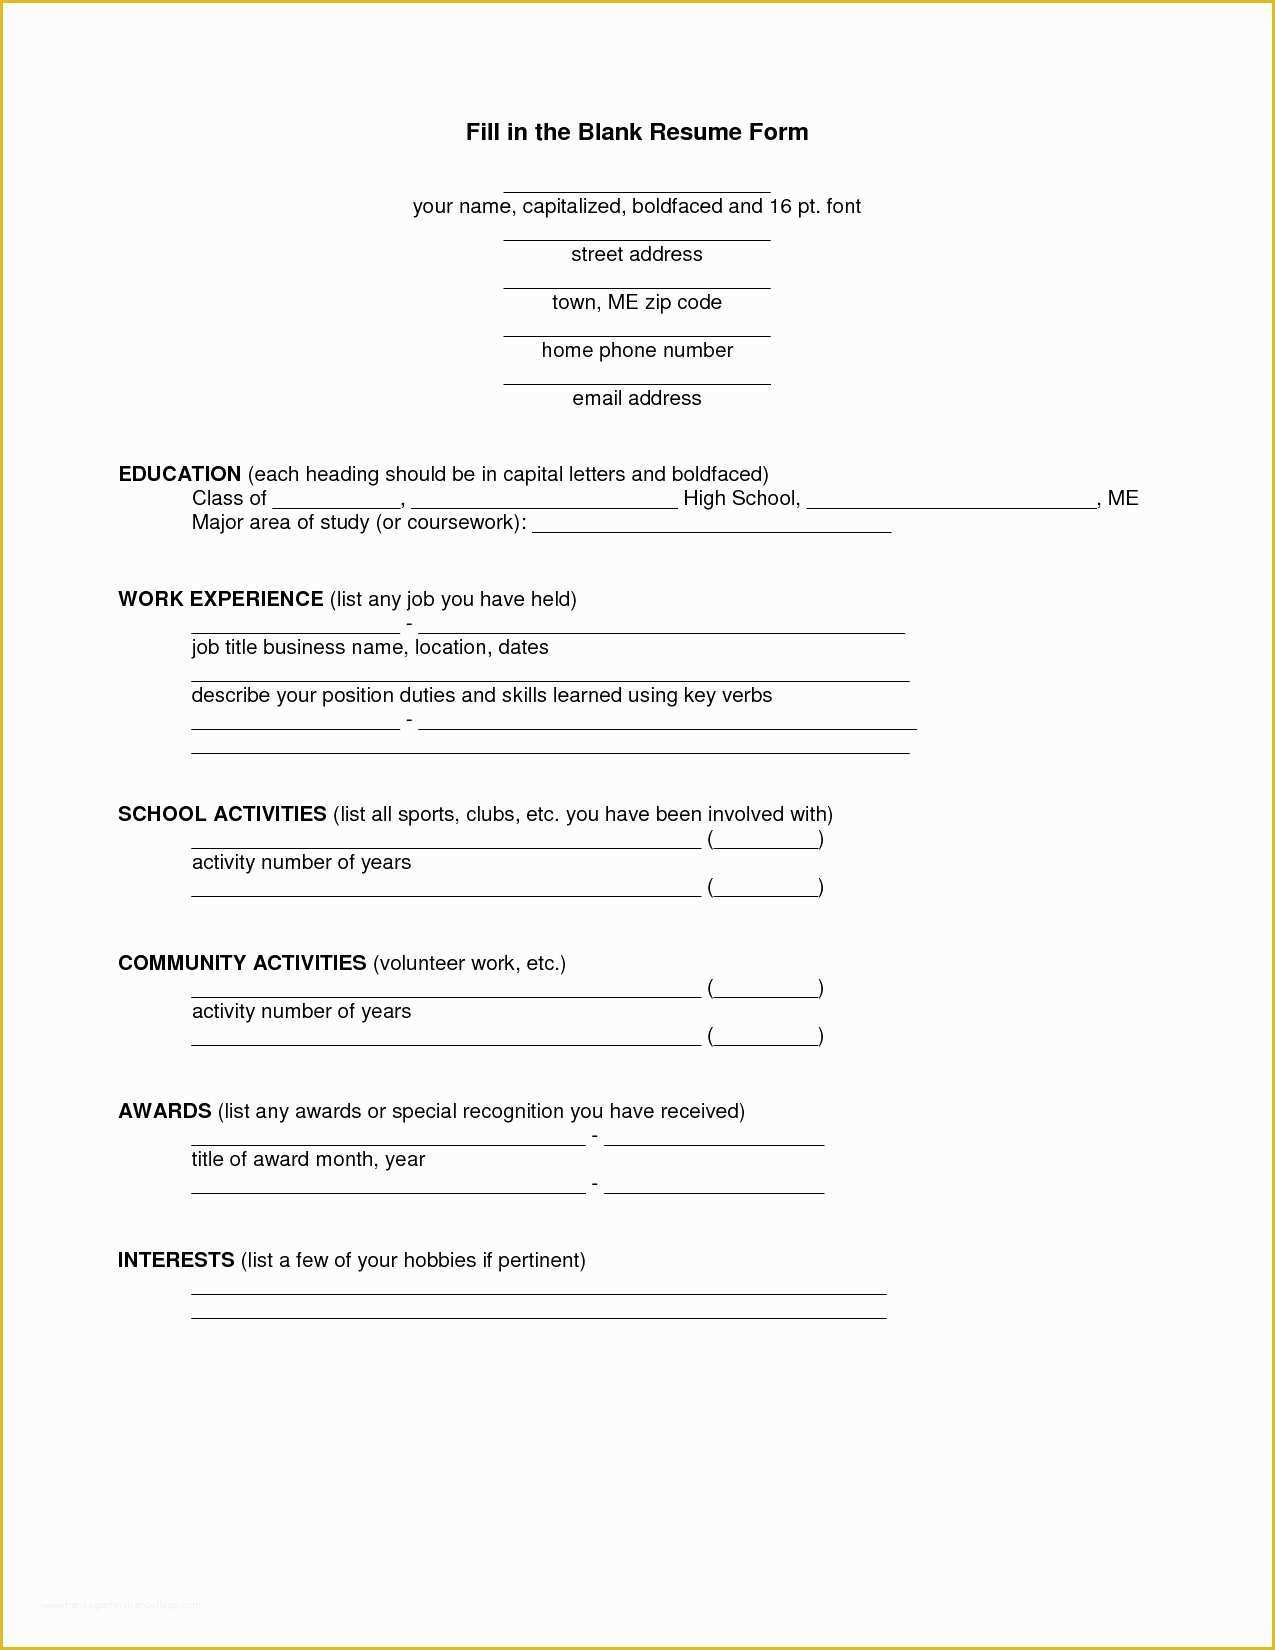 Free Printable Fill In the Blank Resume Templates Of 20 Free Printable Fill In the Blank Resume Templates